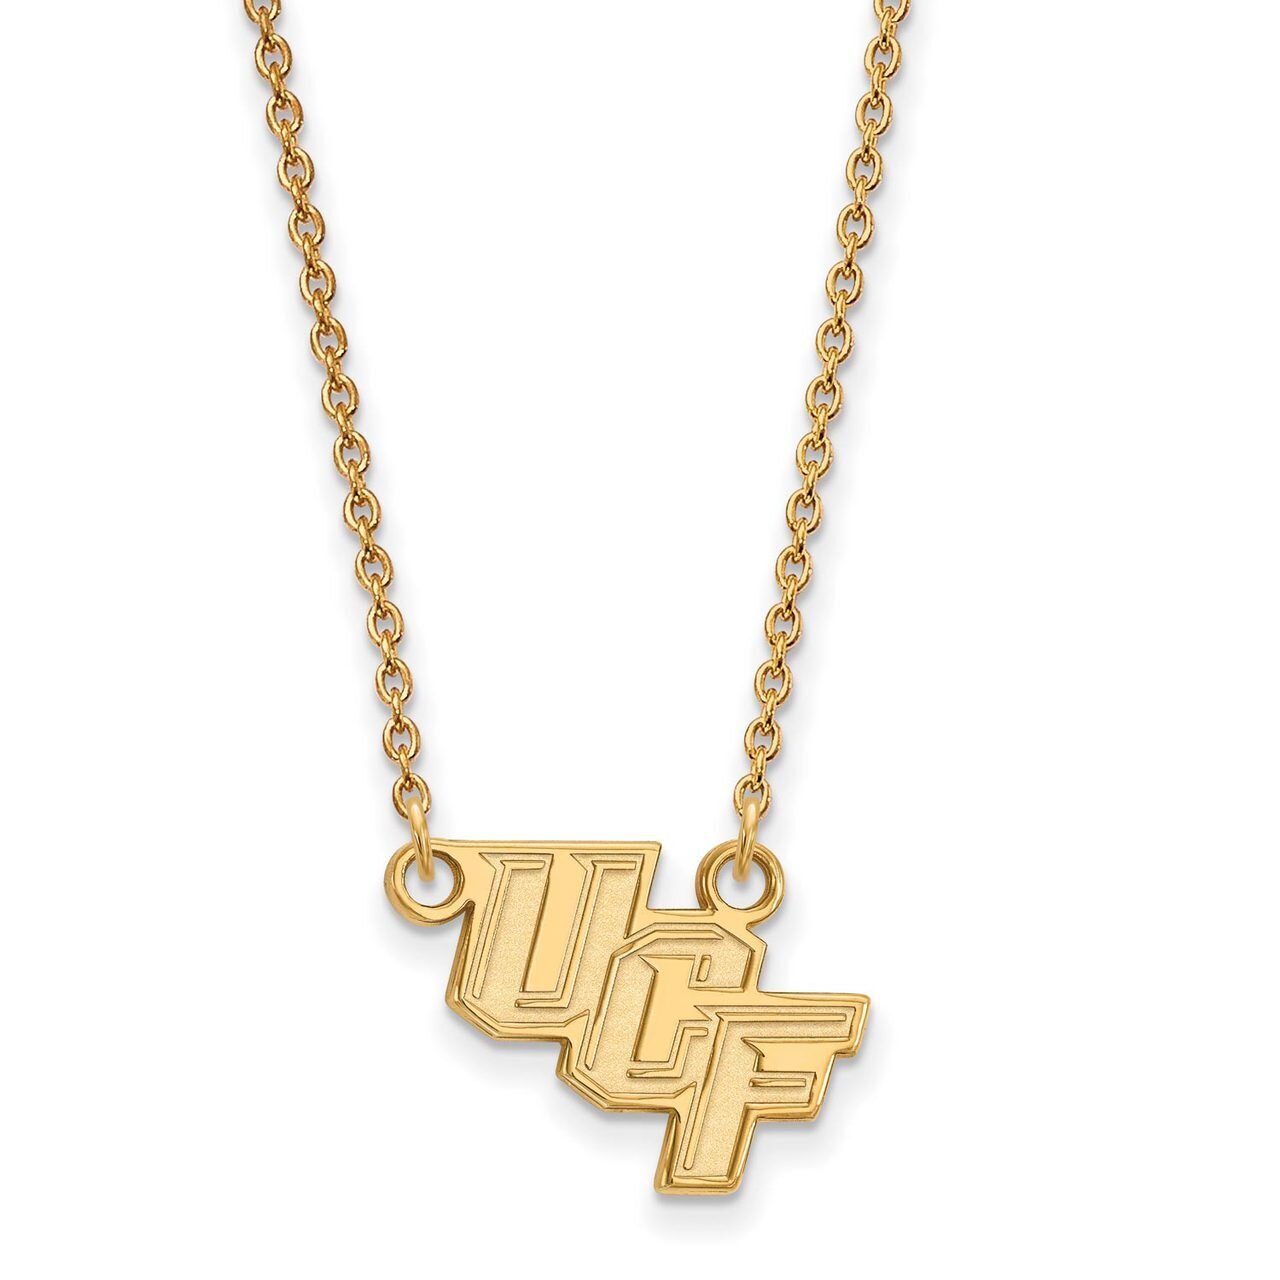 University of Central Florida Small Pendant with Chain Necklace 14k Yellow Gold 4Y011UCF-18